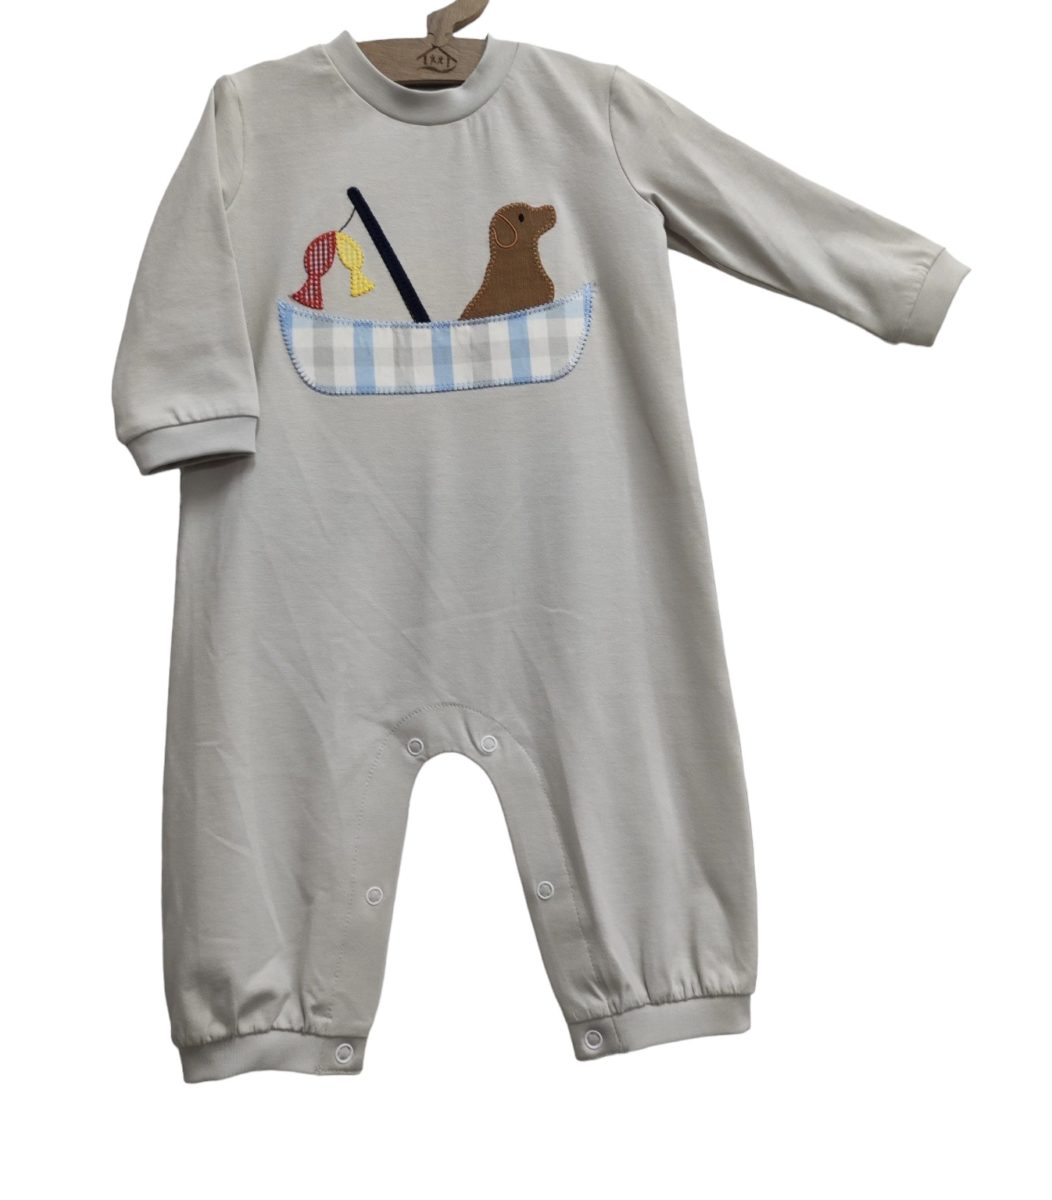 Catch Of The Day Applique Boys Romper